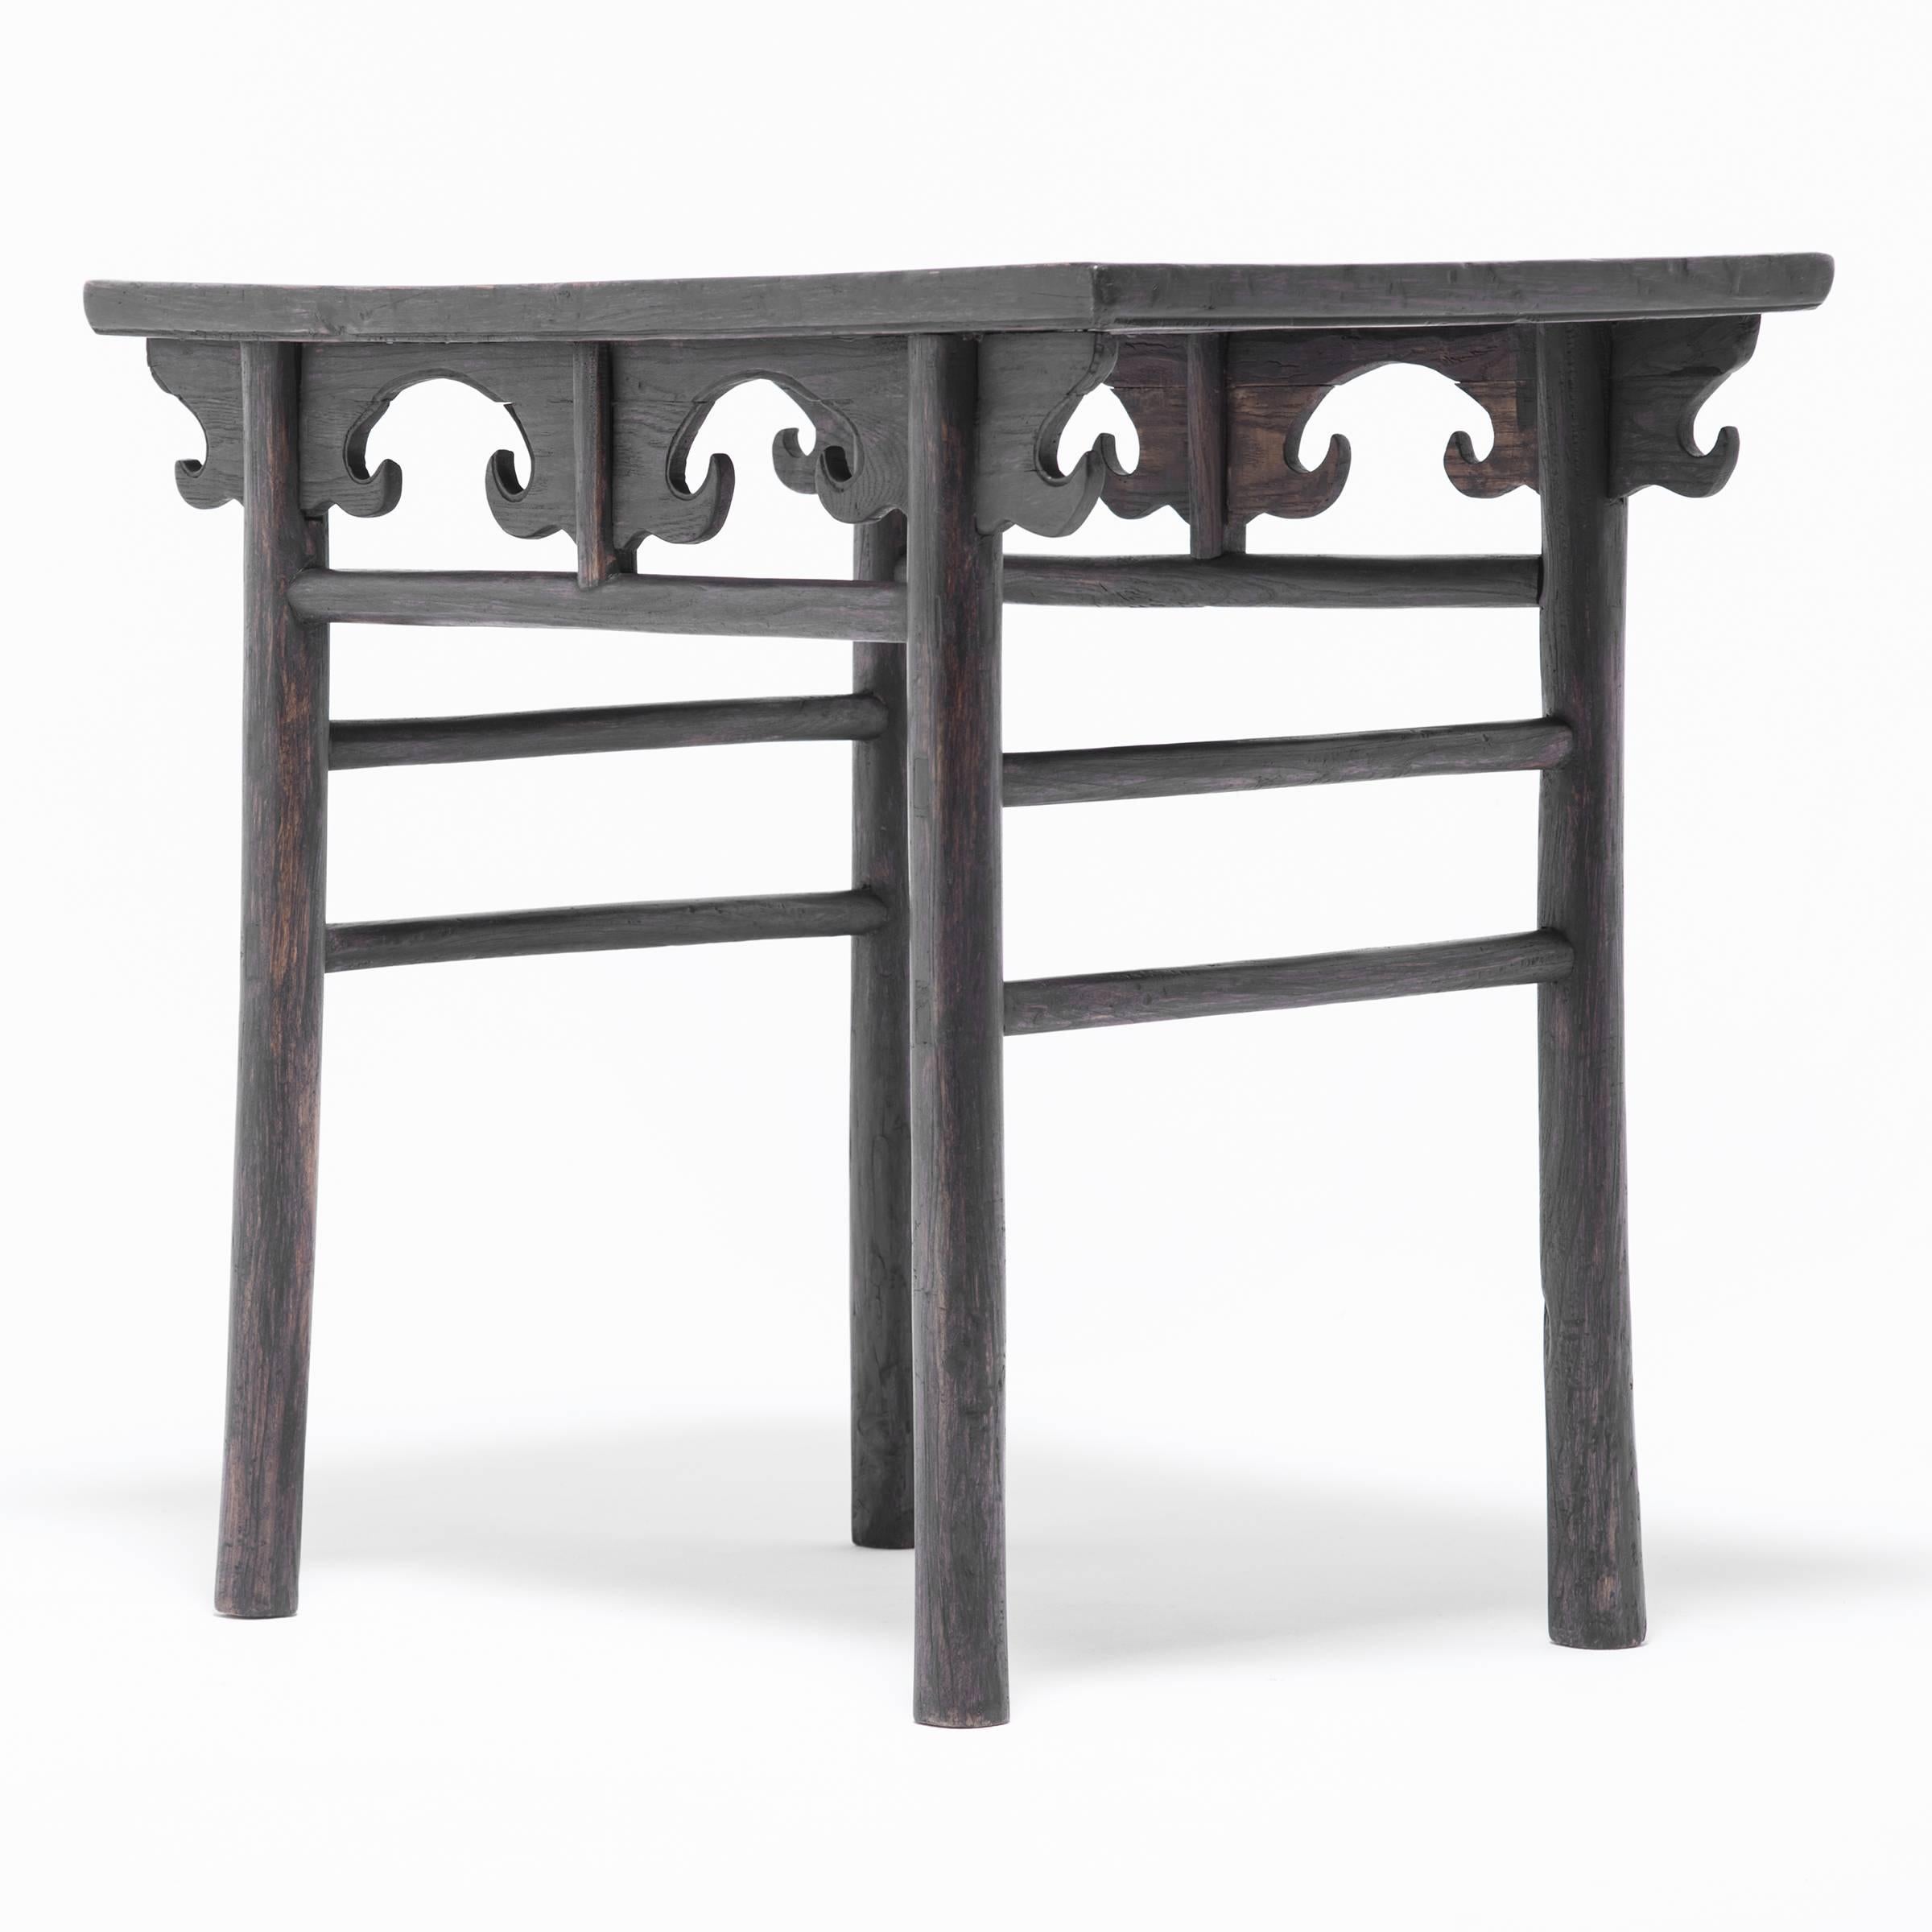 This exquisitely crafted elmwood table was made over 150 years ago in the Shanxi region of China. The simple and sophisticated construction is dramatically highlighted by the way the spandrels come together with the spirited apron motif to create a